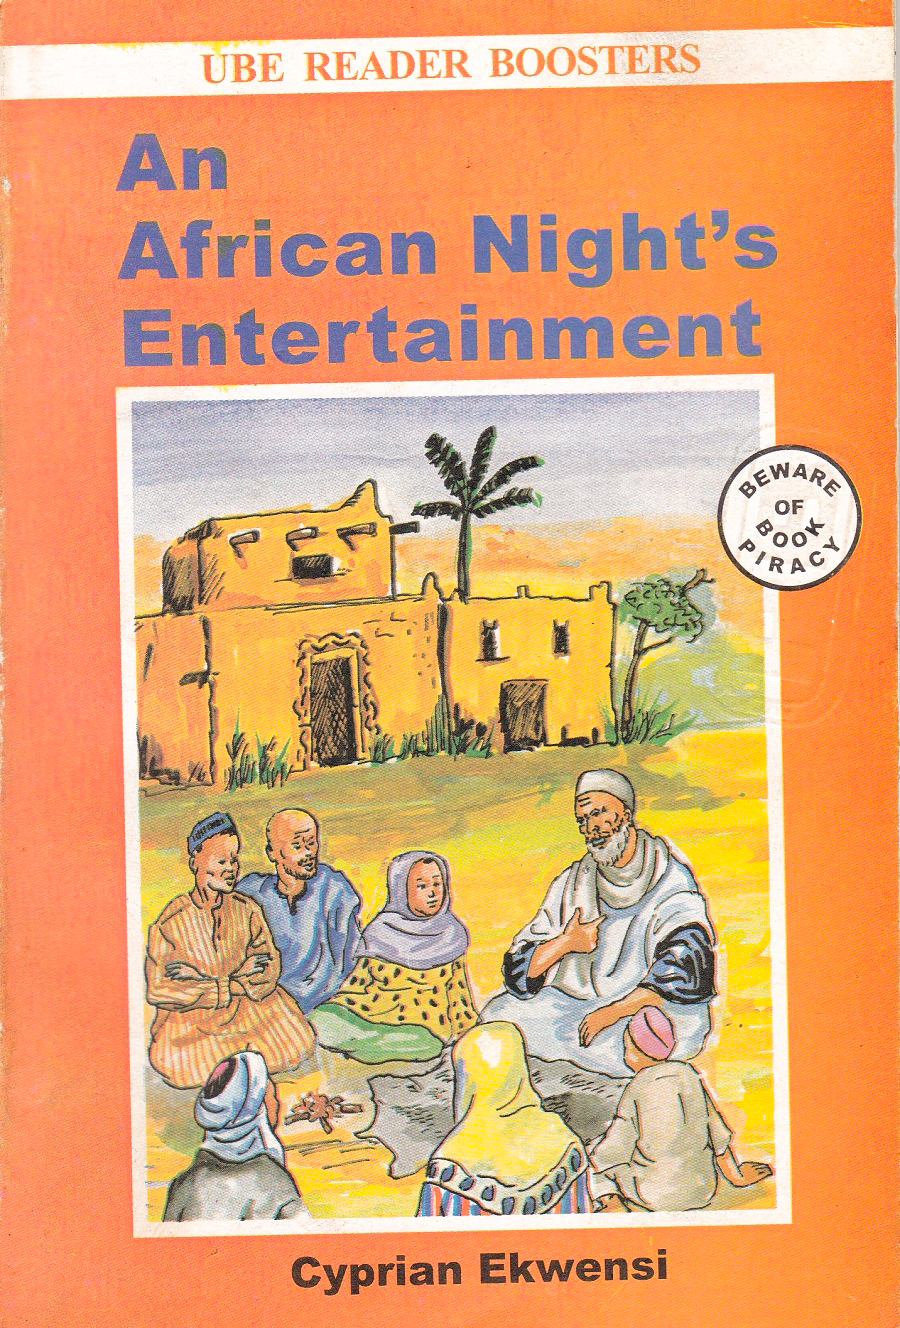 AN AFRICAN NIGHT’S ENTERTAINMENT